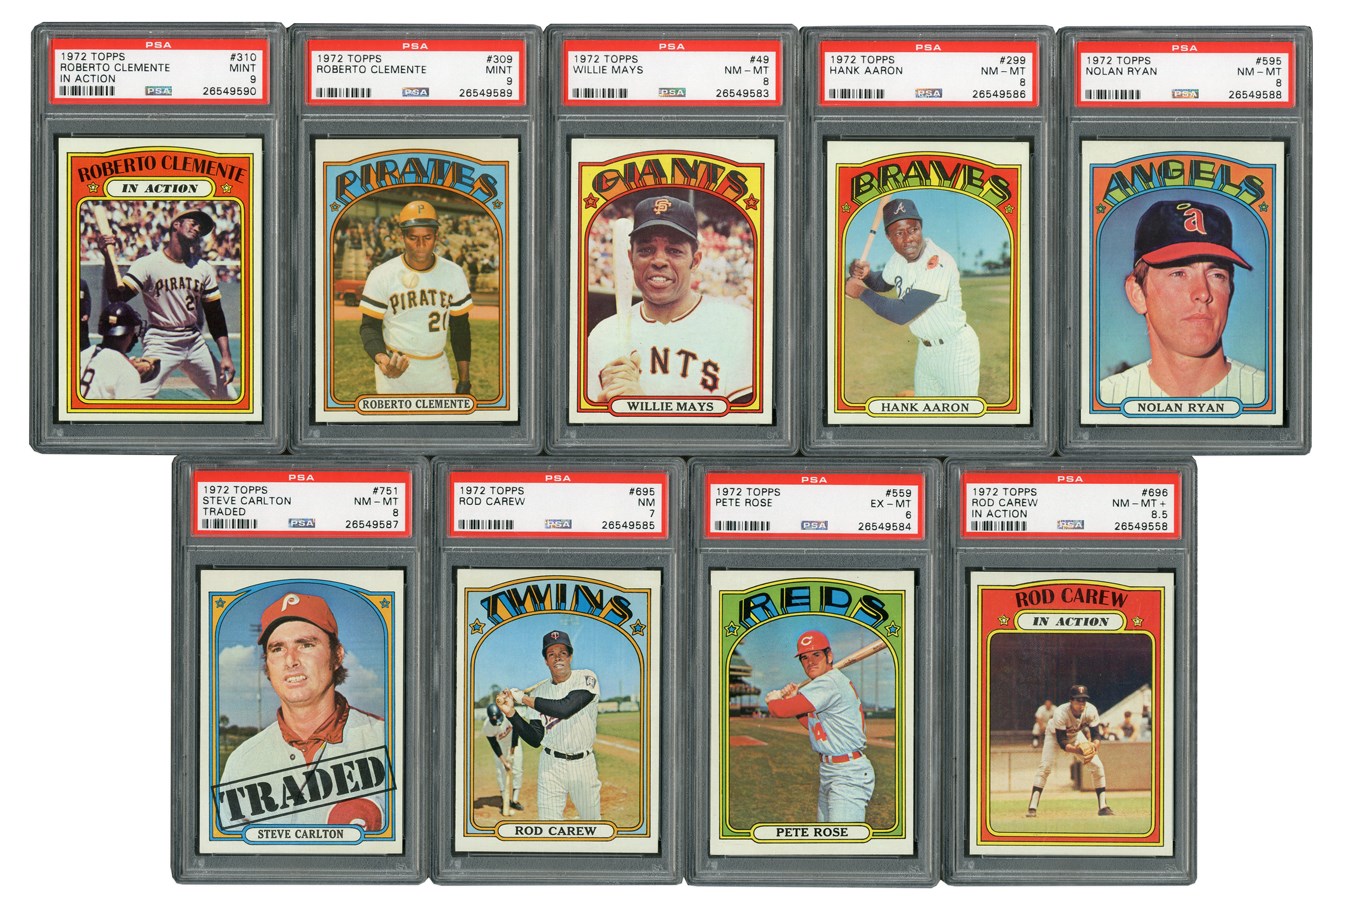 1972 Topps High Grade Complete Set (787) with Two PSA MINT Clemente Cards!